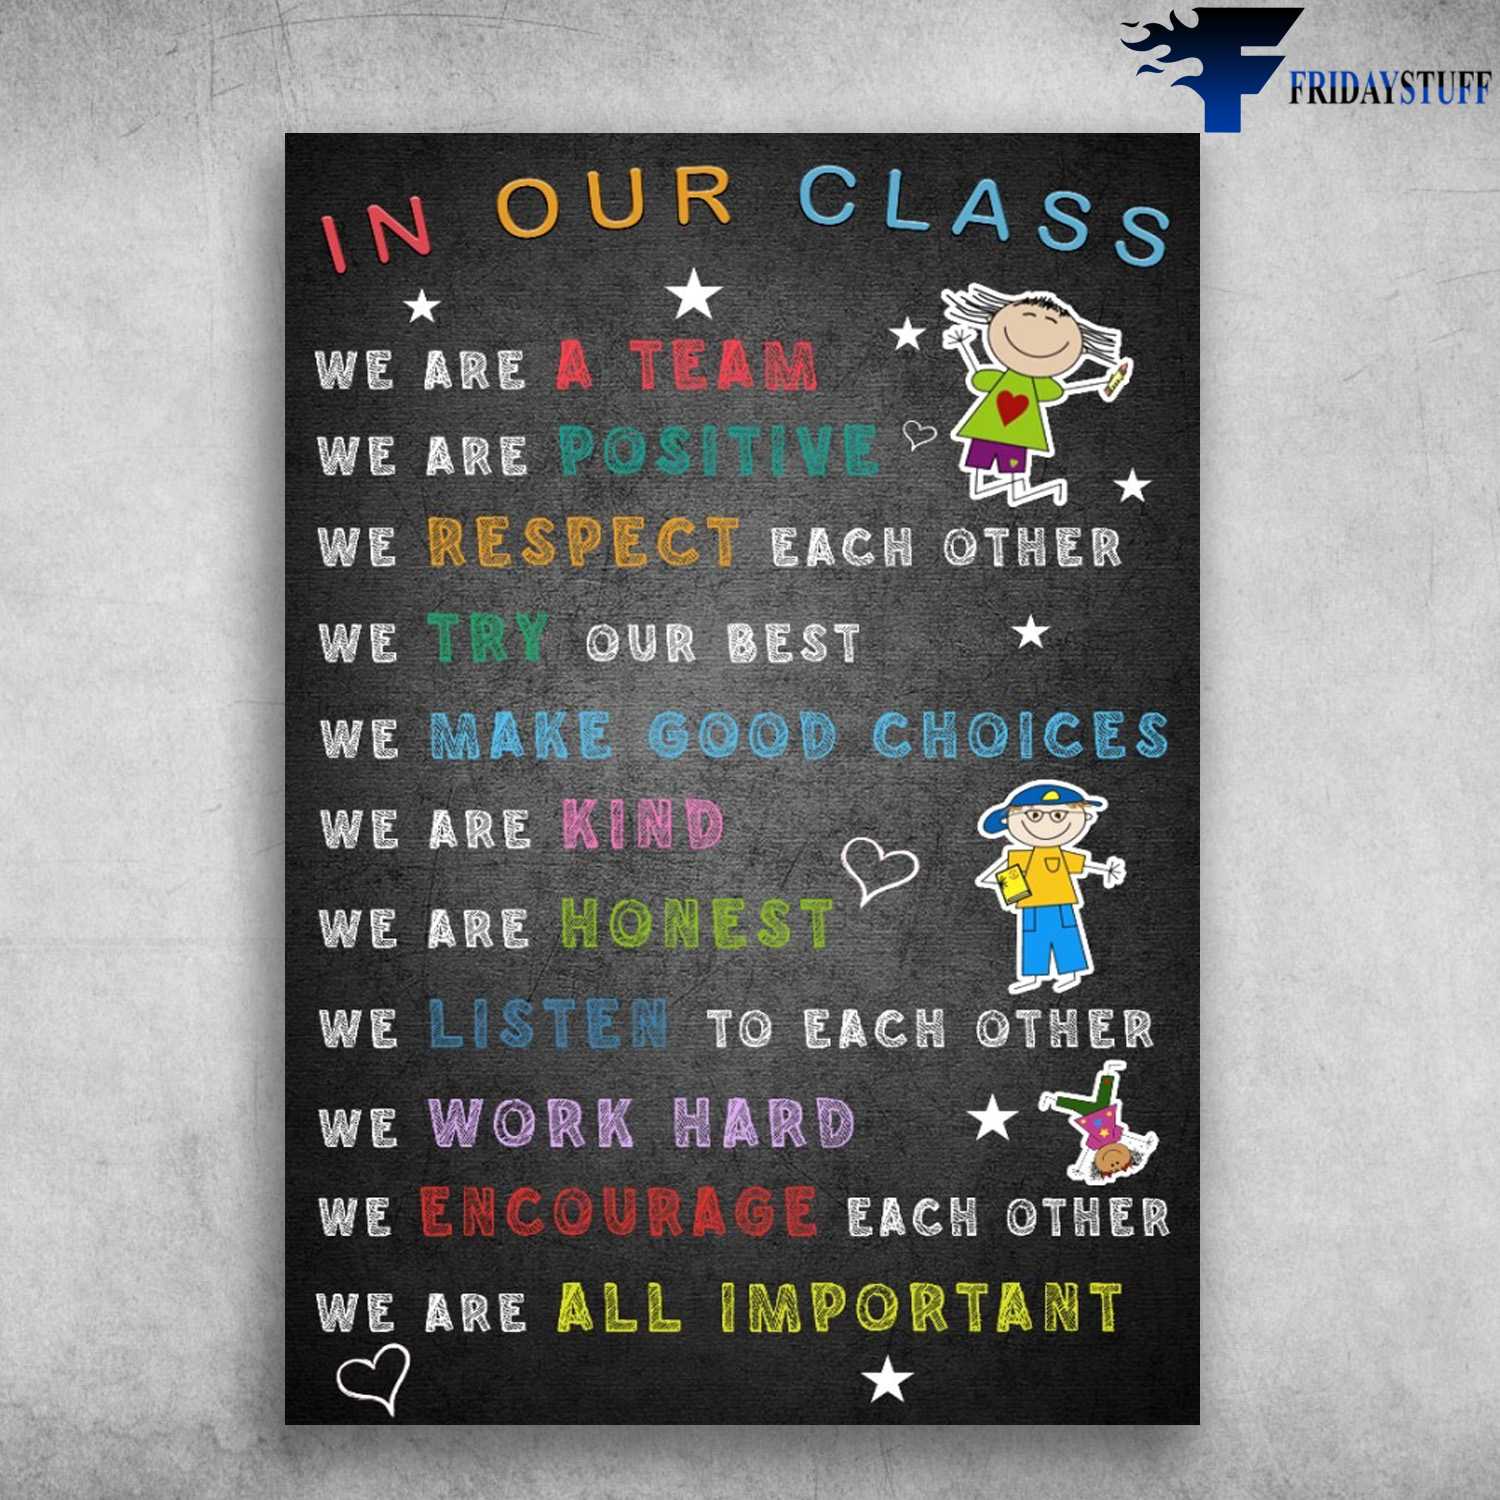 Class Rules - In Our Class, We Are A Team, We Are Positive, We Respect Each Other, We Try Our Best, We Make Good Choises, We Are Kind, We Are All Important